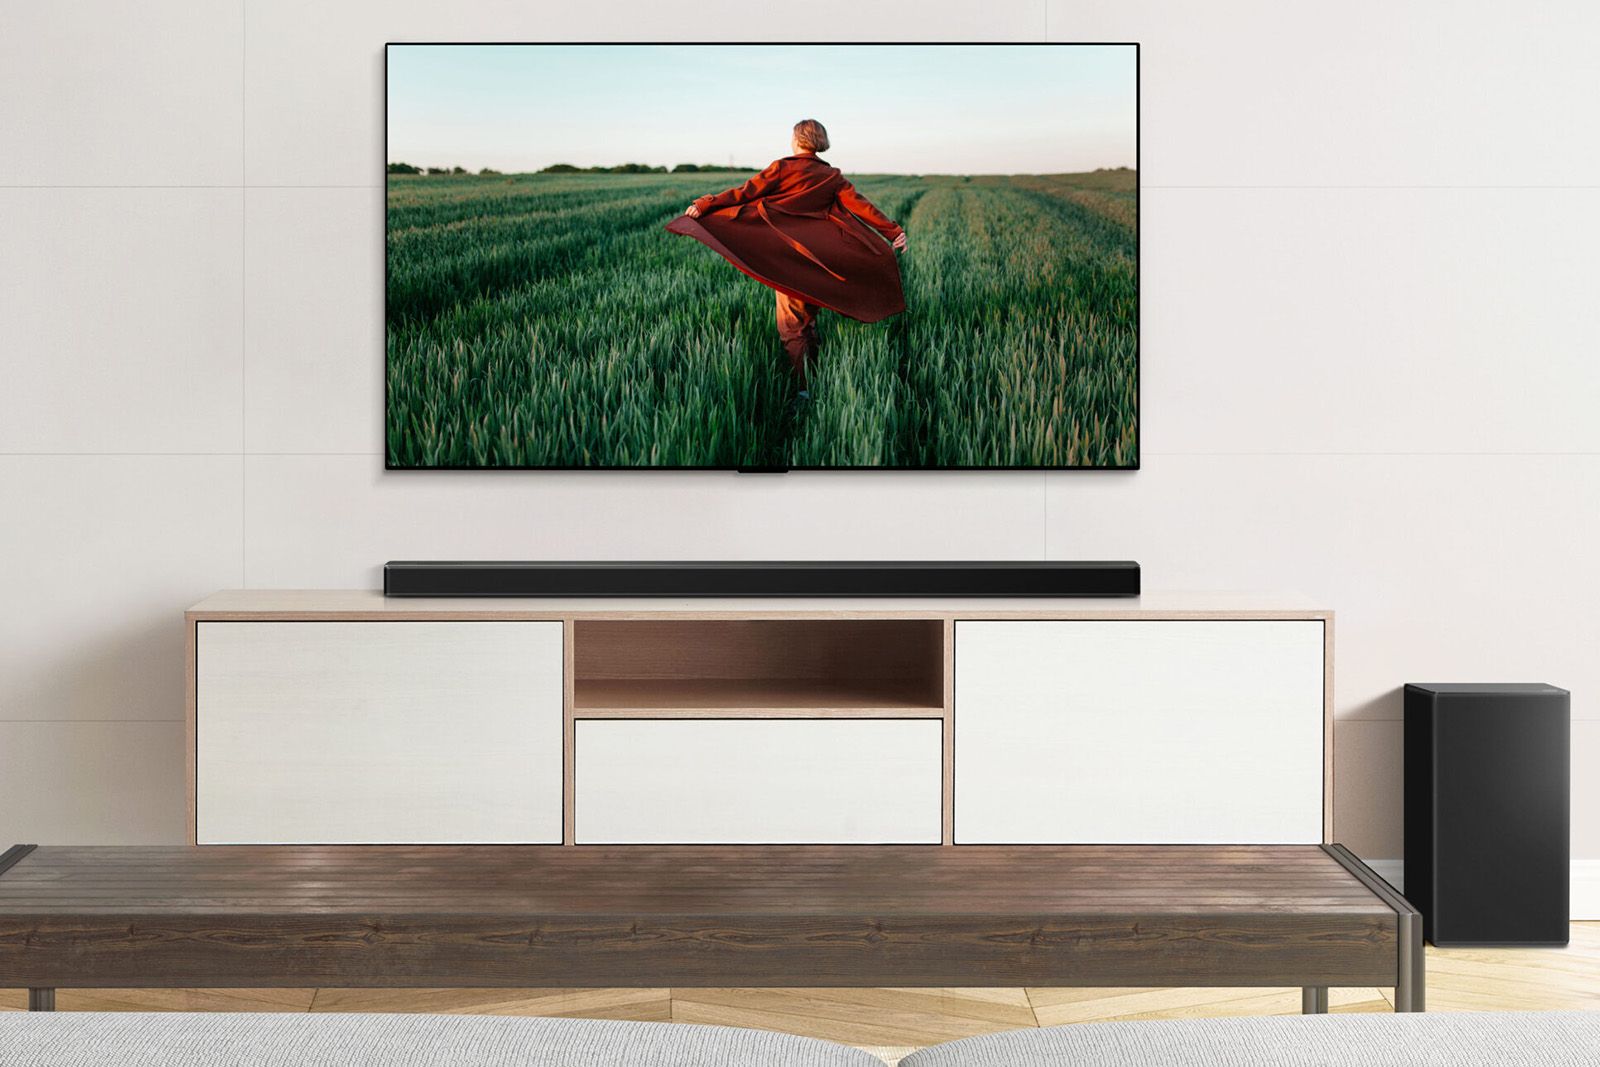 LG's 2021 soundbars start to roll out, SP11RA leads the way with 7.1.4 channels photo 3